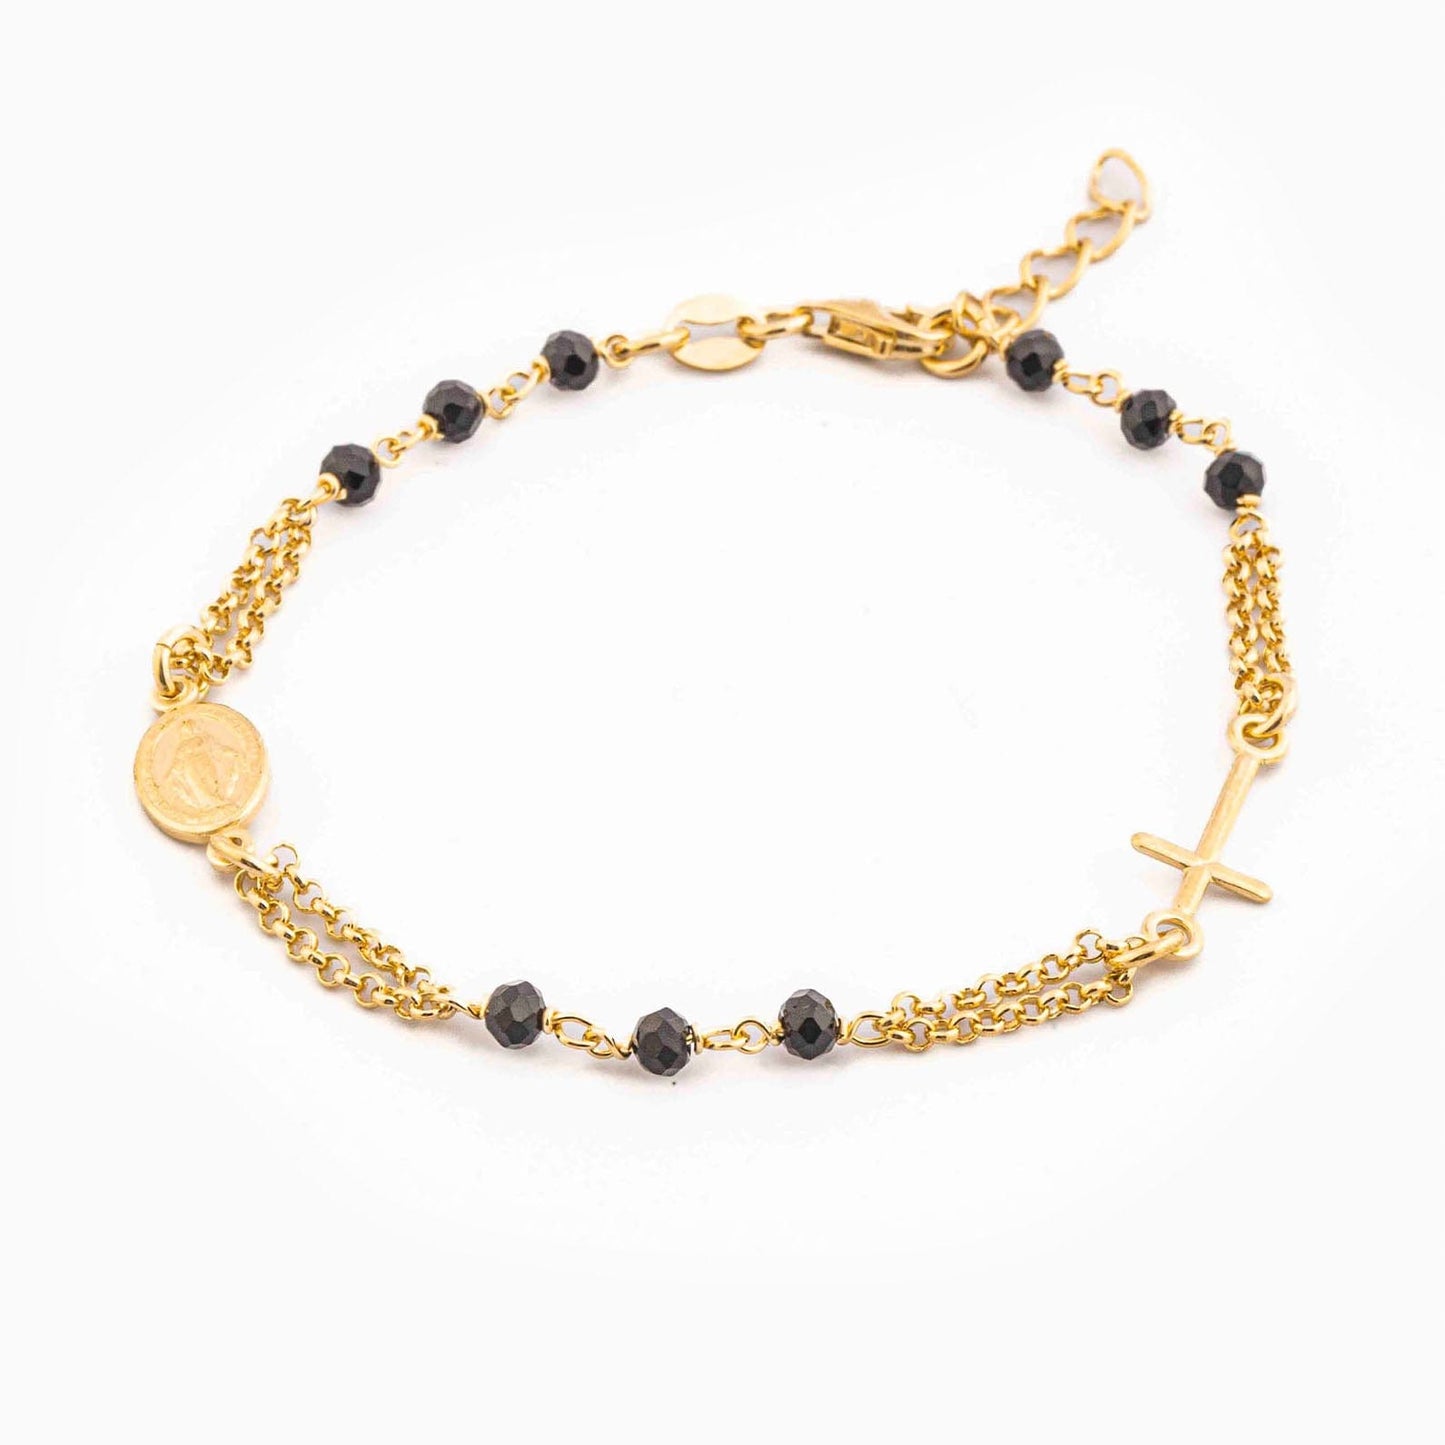 MONDO CATTOLICO Prayer Beads Gold / Cm 17.5 (6.9 in) / Cm 3 (1.2 in) STERLING SILVER ROSARY BRACELET DOUBLE CHAIN BLACK FACETED BEADS